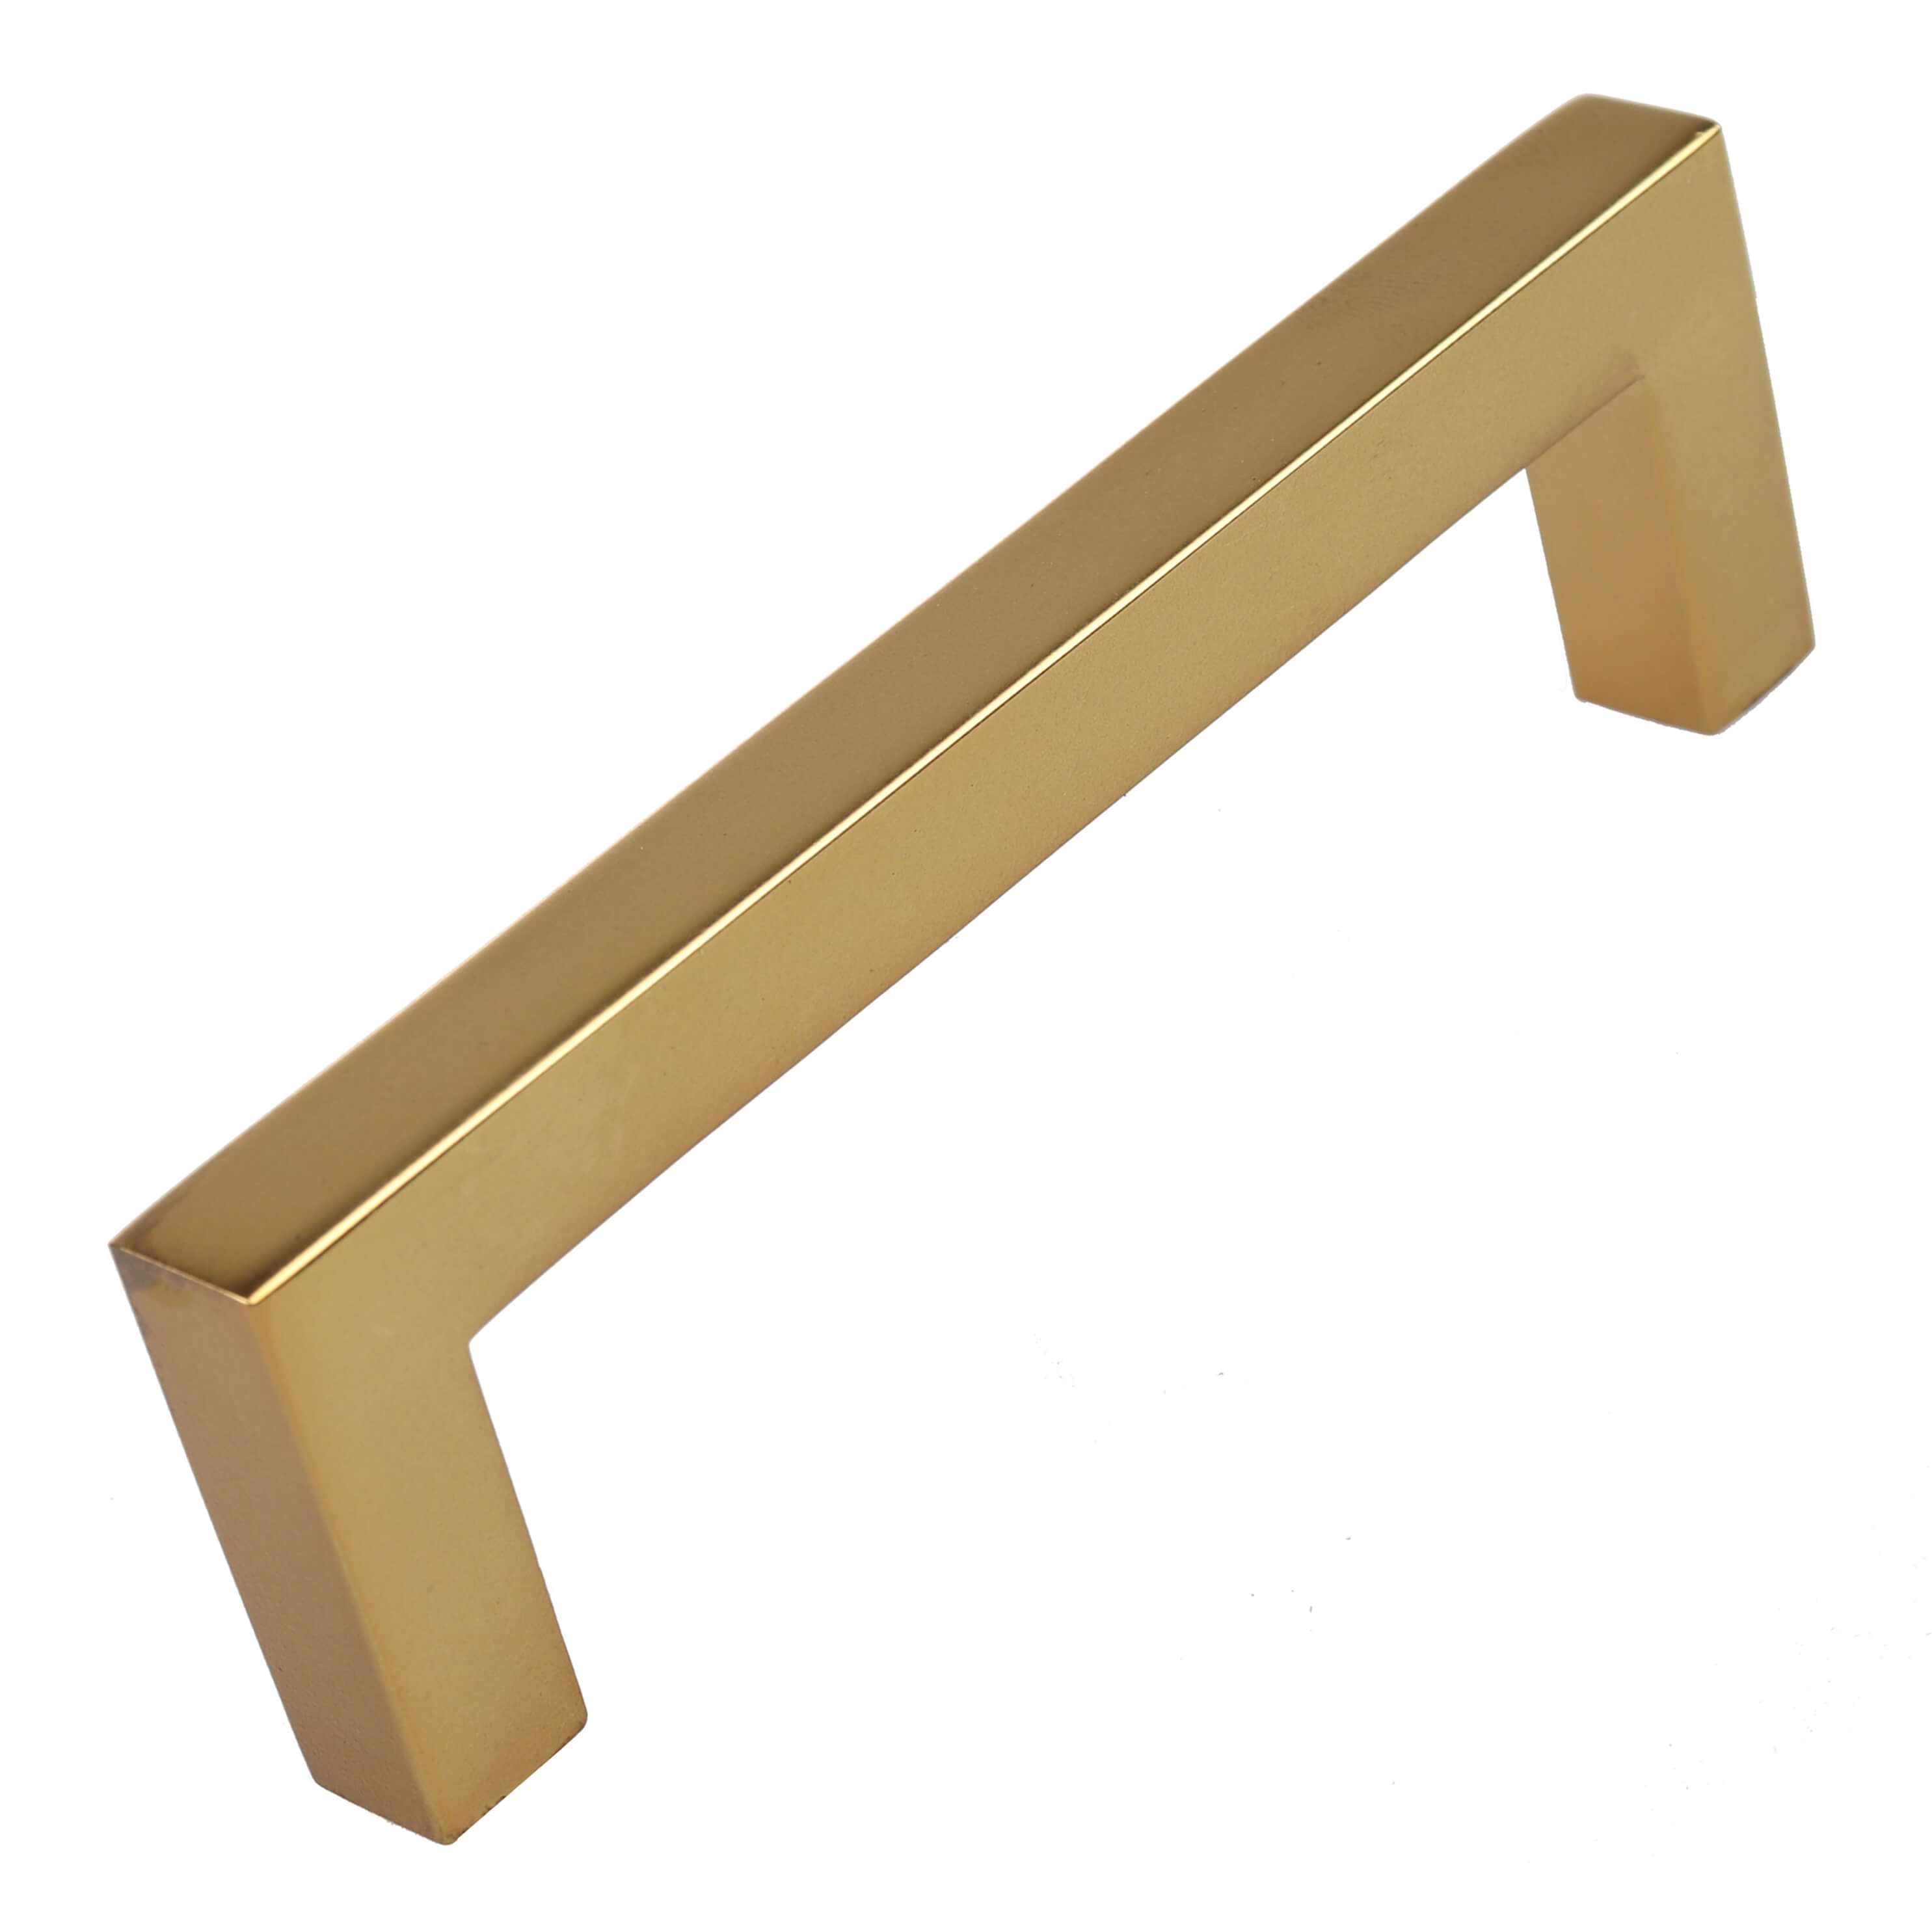 GlideRite 3-3/4 in. Center Solid Square Bar Cabinet Pulls, Brass Gold, Pack of 10 - image 1 of 3